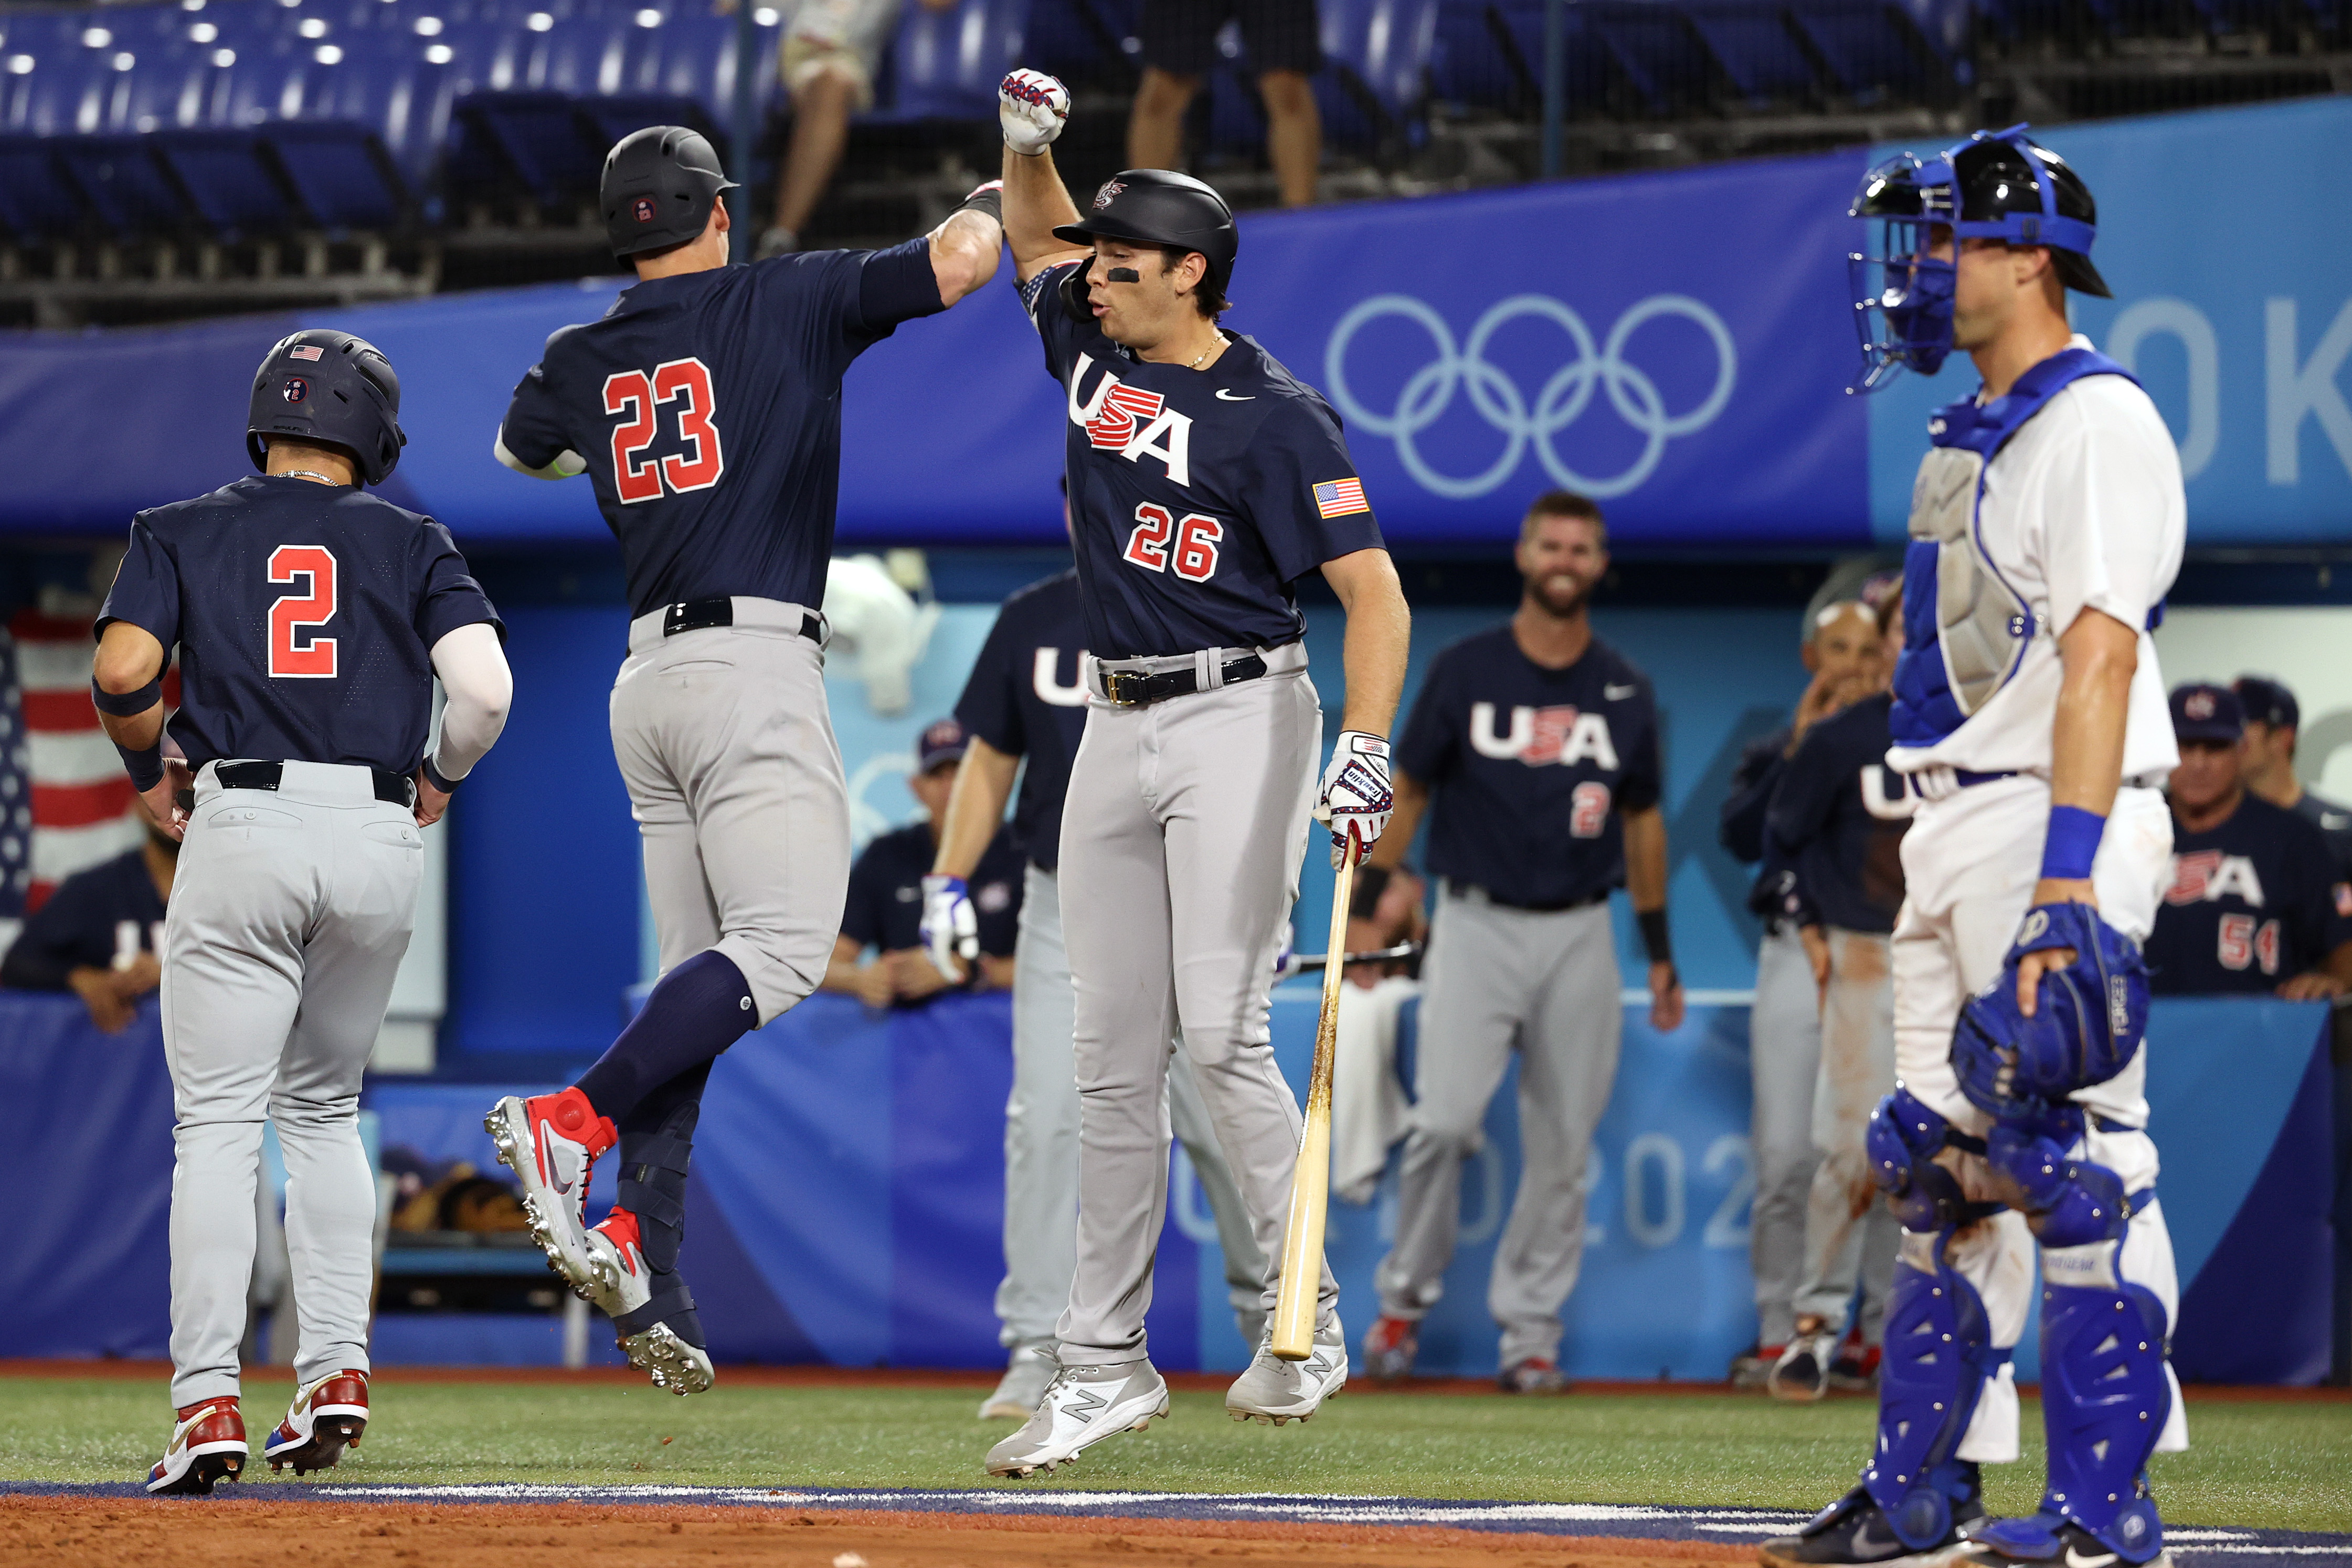 Olympic Baseball 21 Team Usa Defeats Israel To Open Group Play News Update